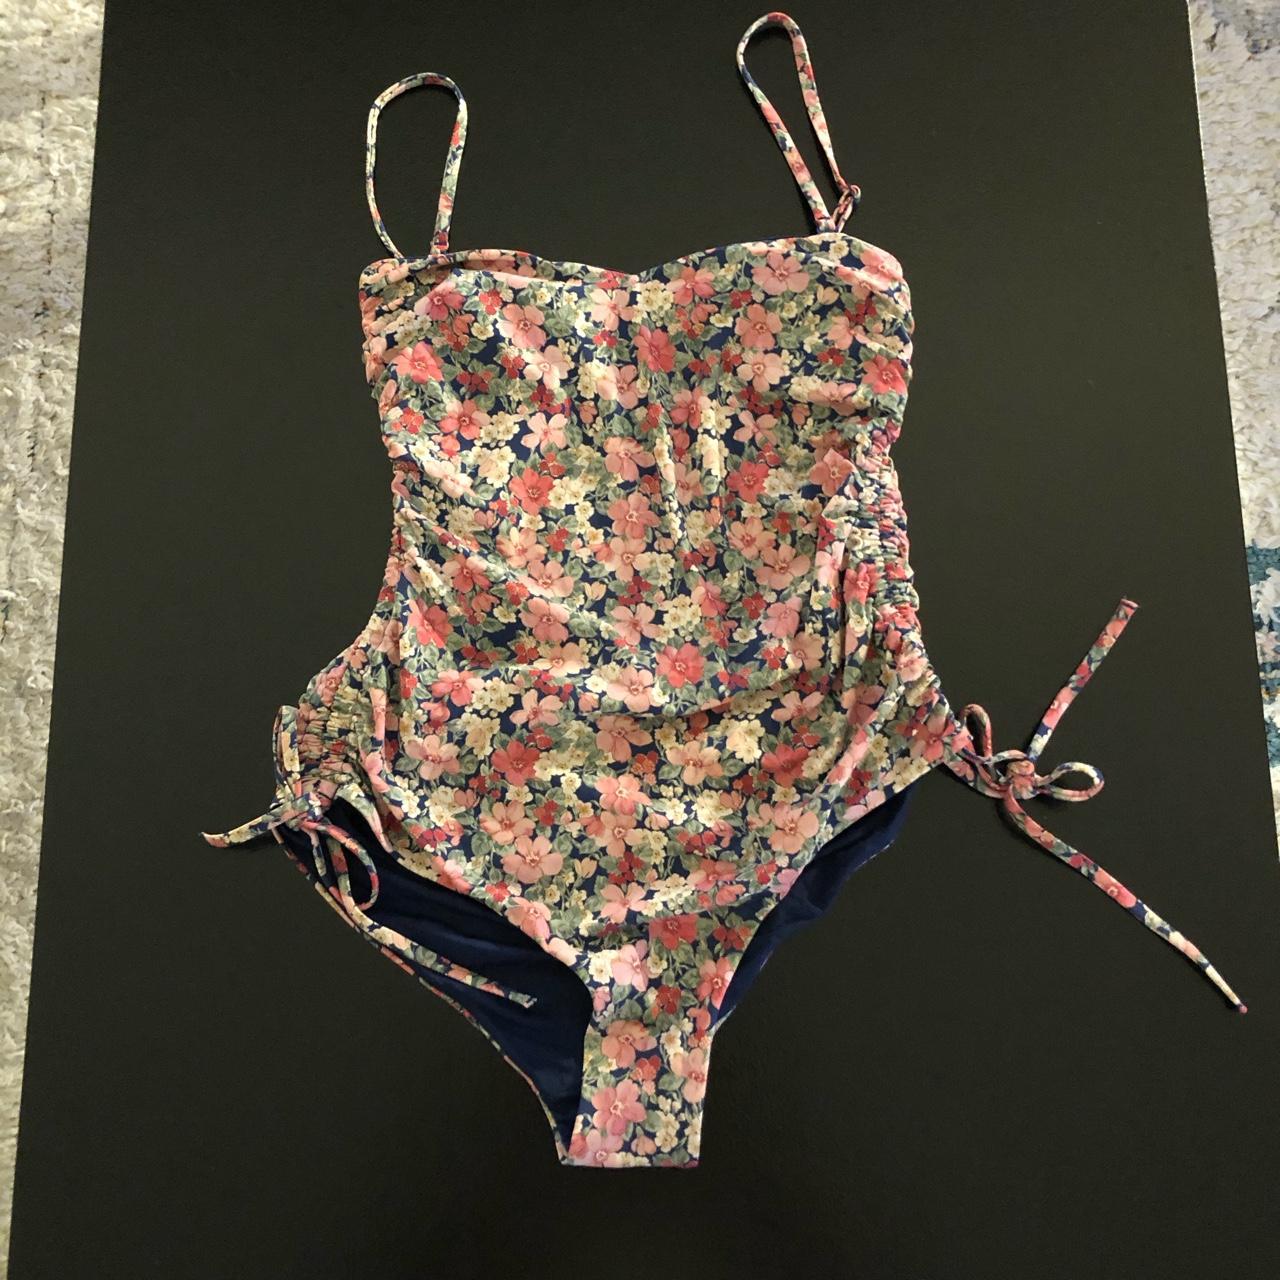 Swimsuit one piece - & Other stories Size small - Depop